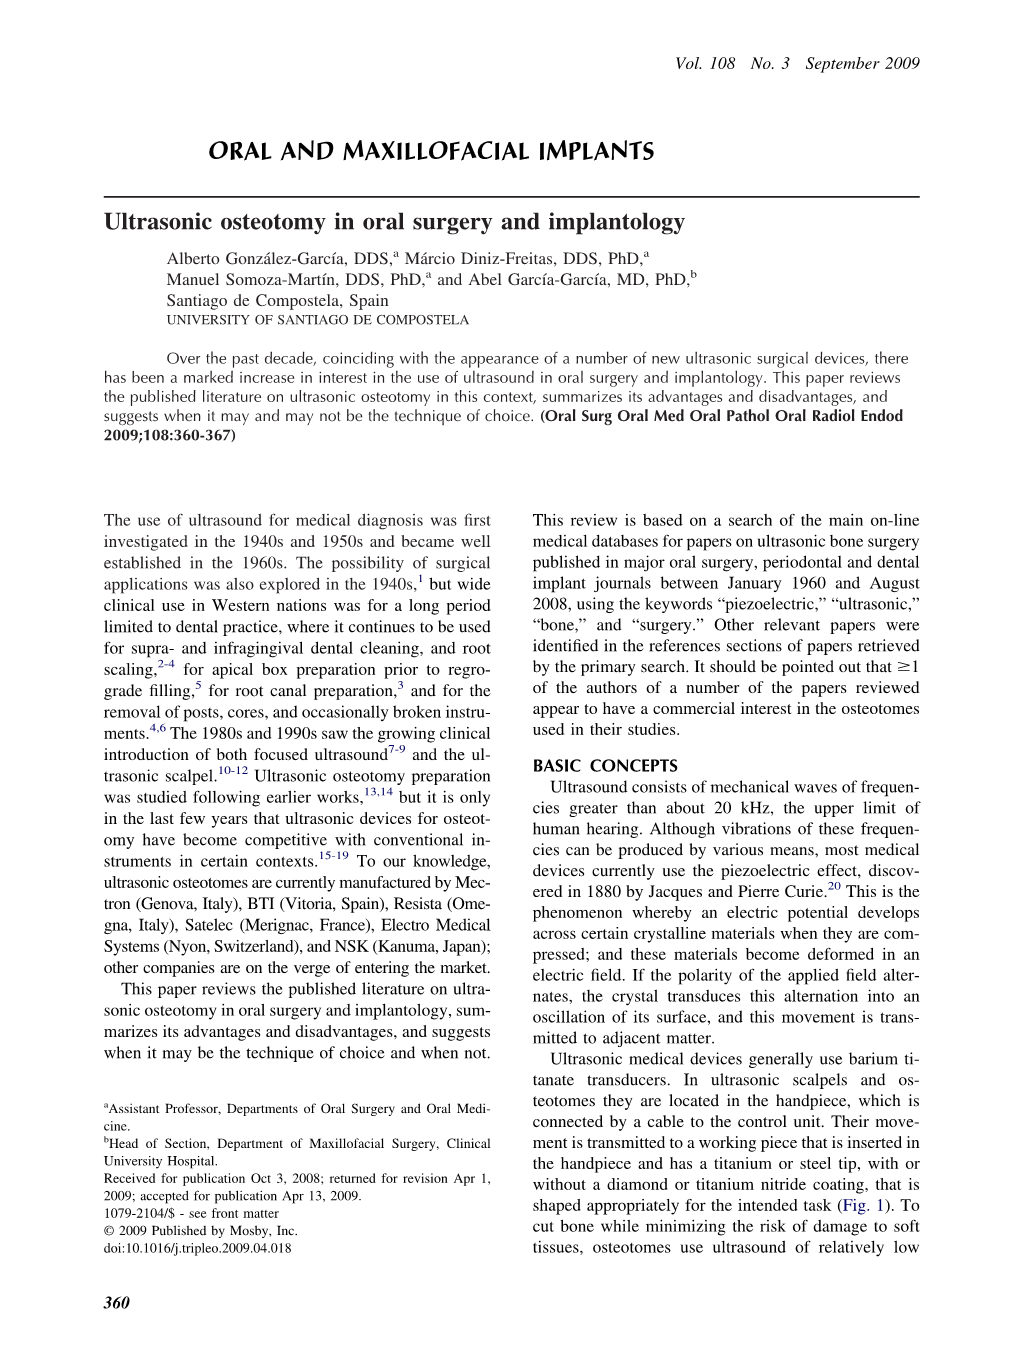 Ultrasonic Osteotomy in Oral Surgery and Implantology ORAL AND